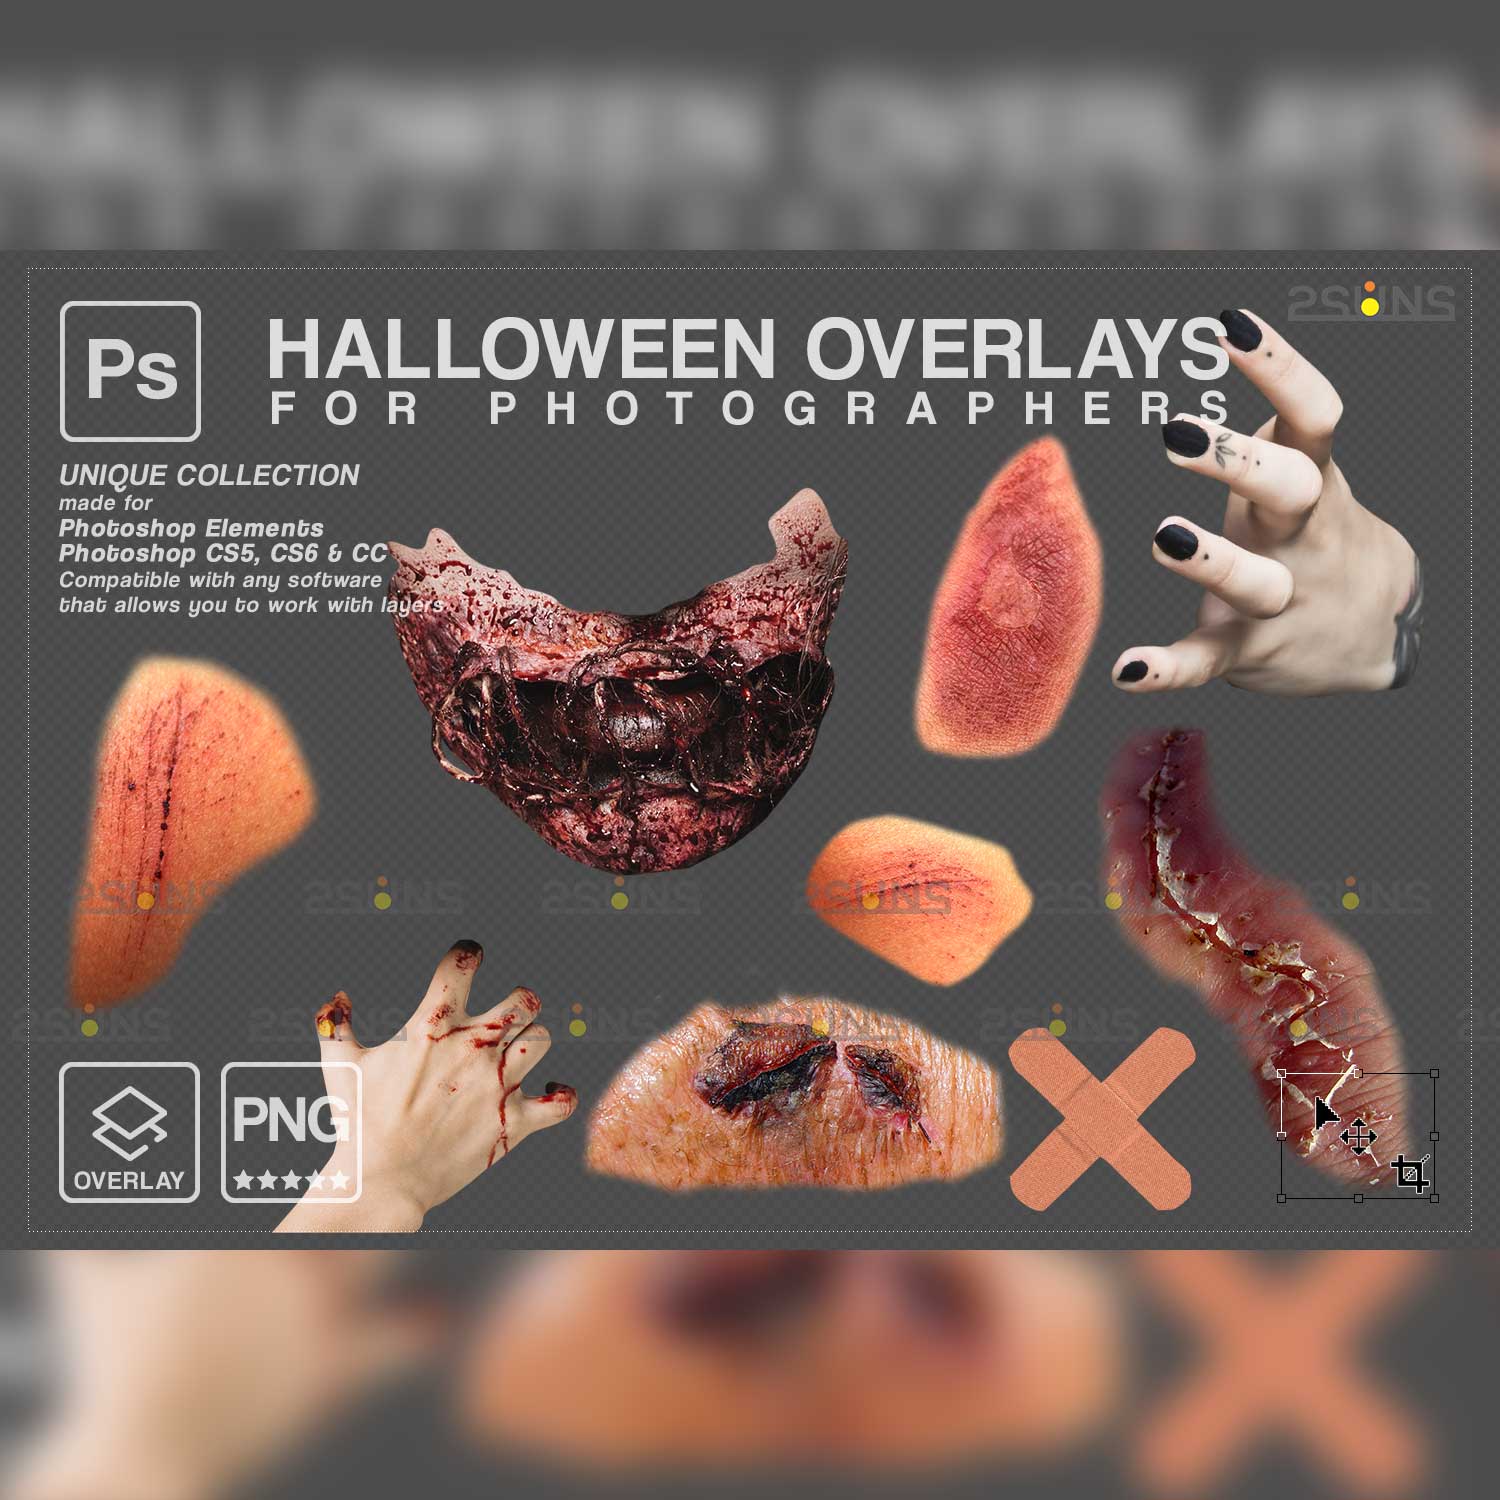 Halloween Wounds and Scars Blood Splatter Photoshop Overlay.